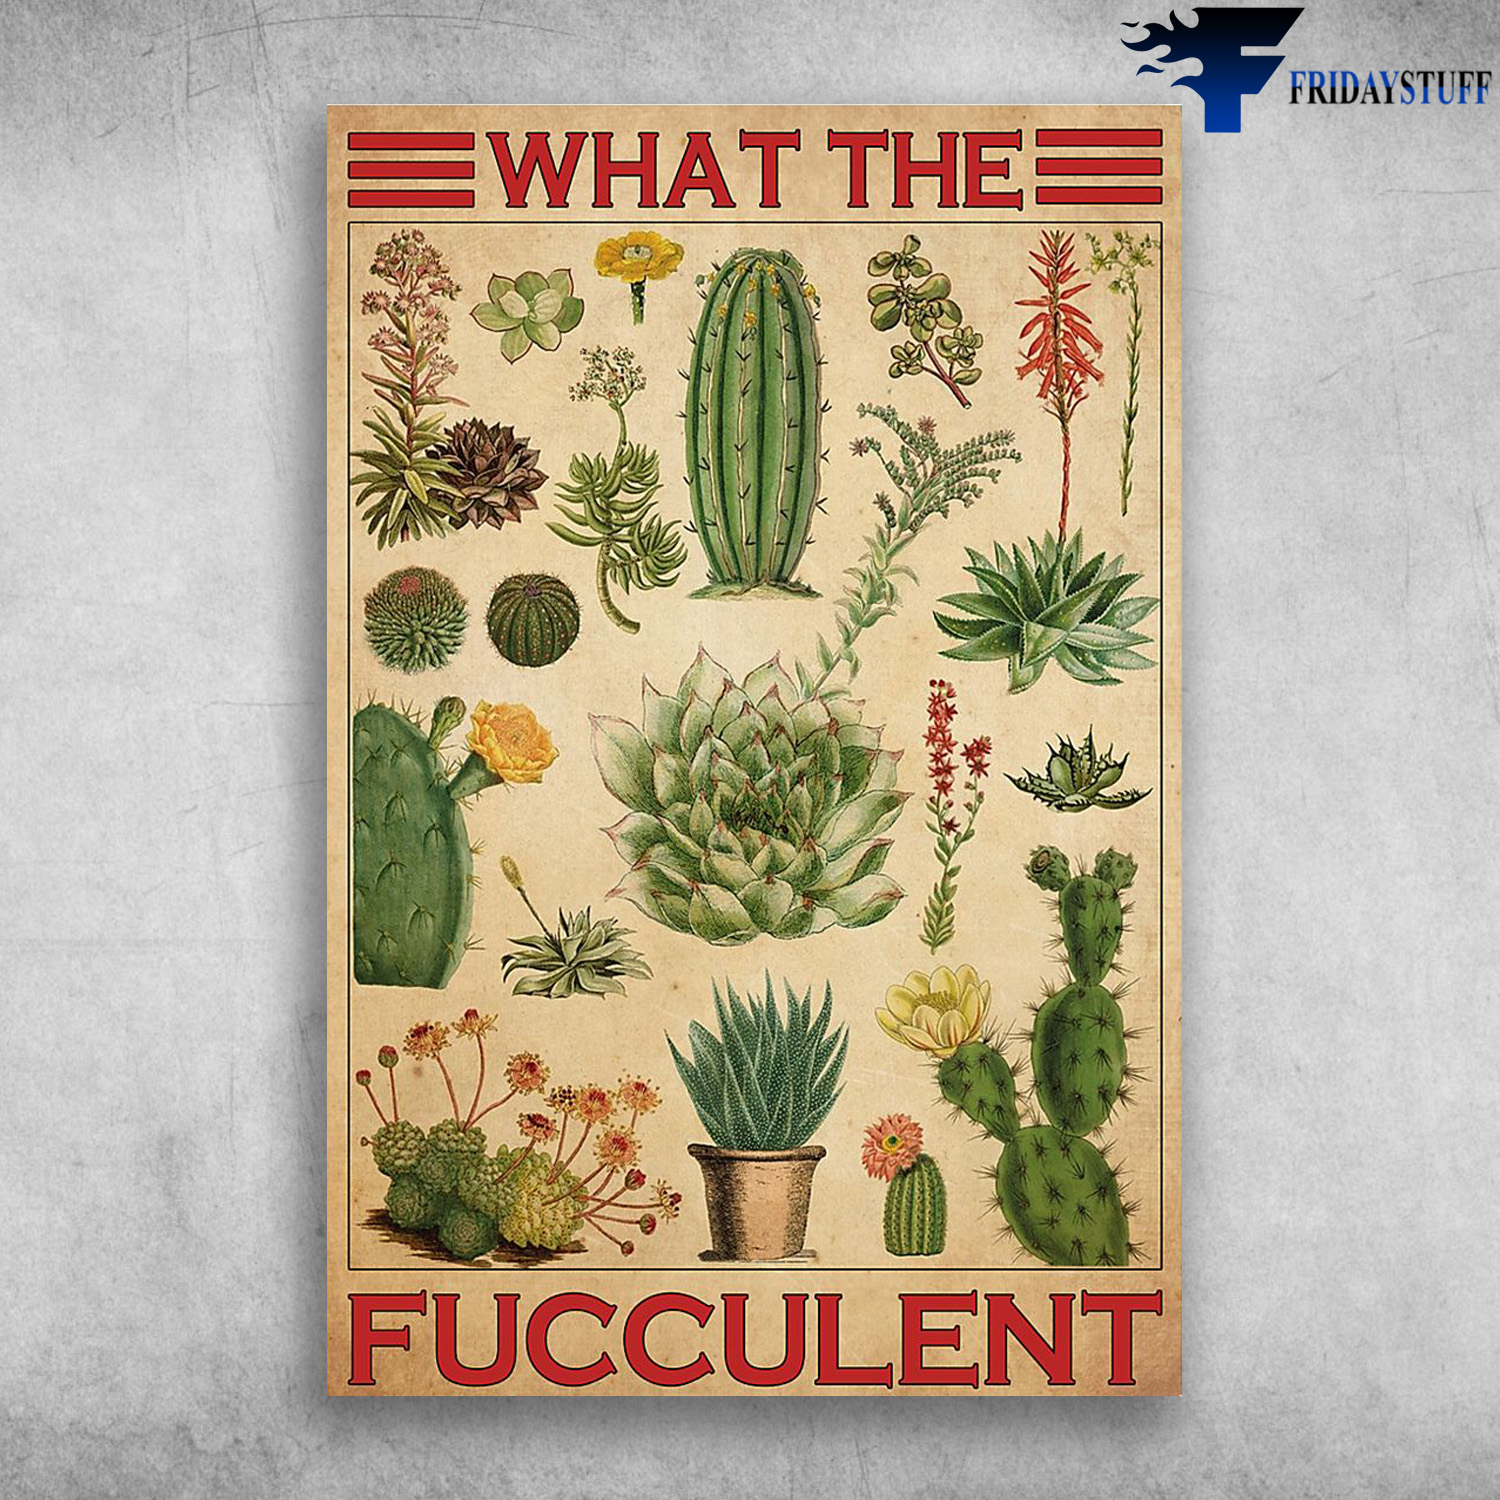 Some Types Of Cactus - What The Fucculent